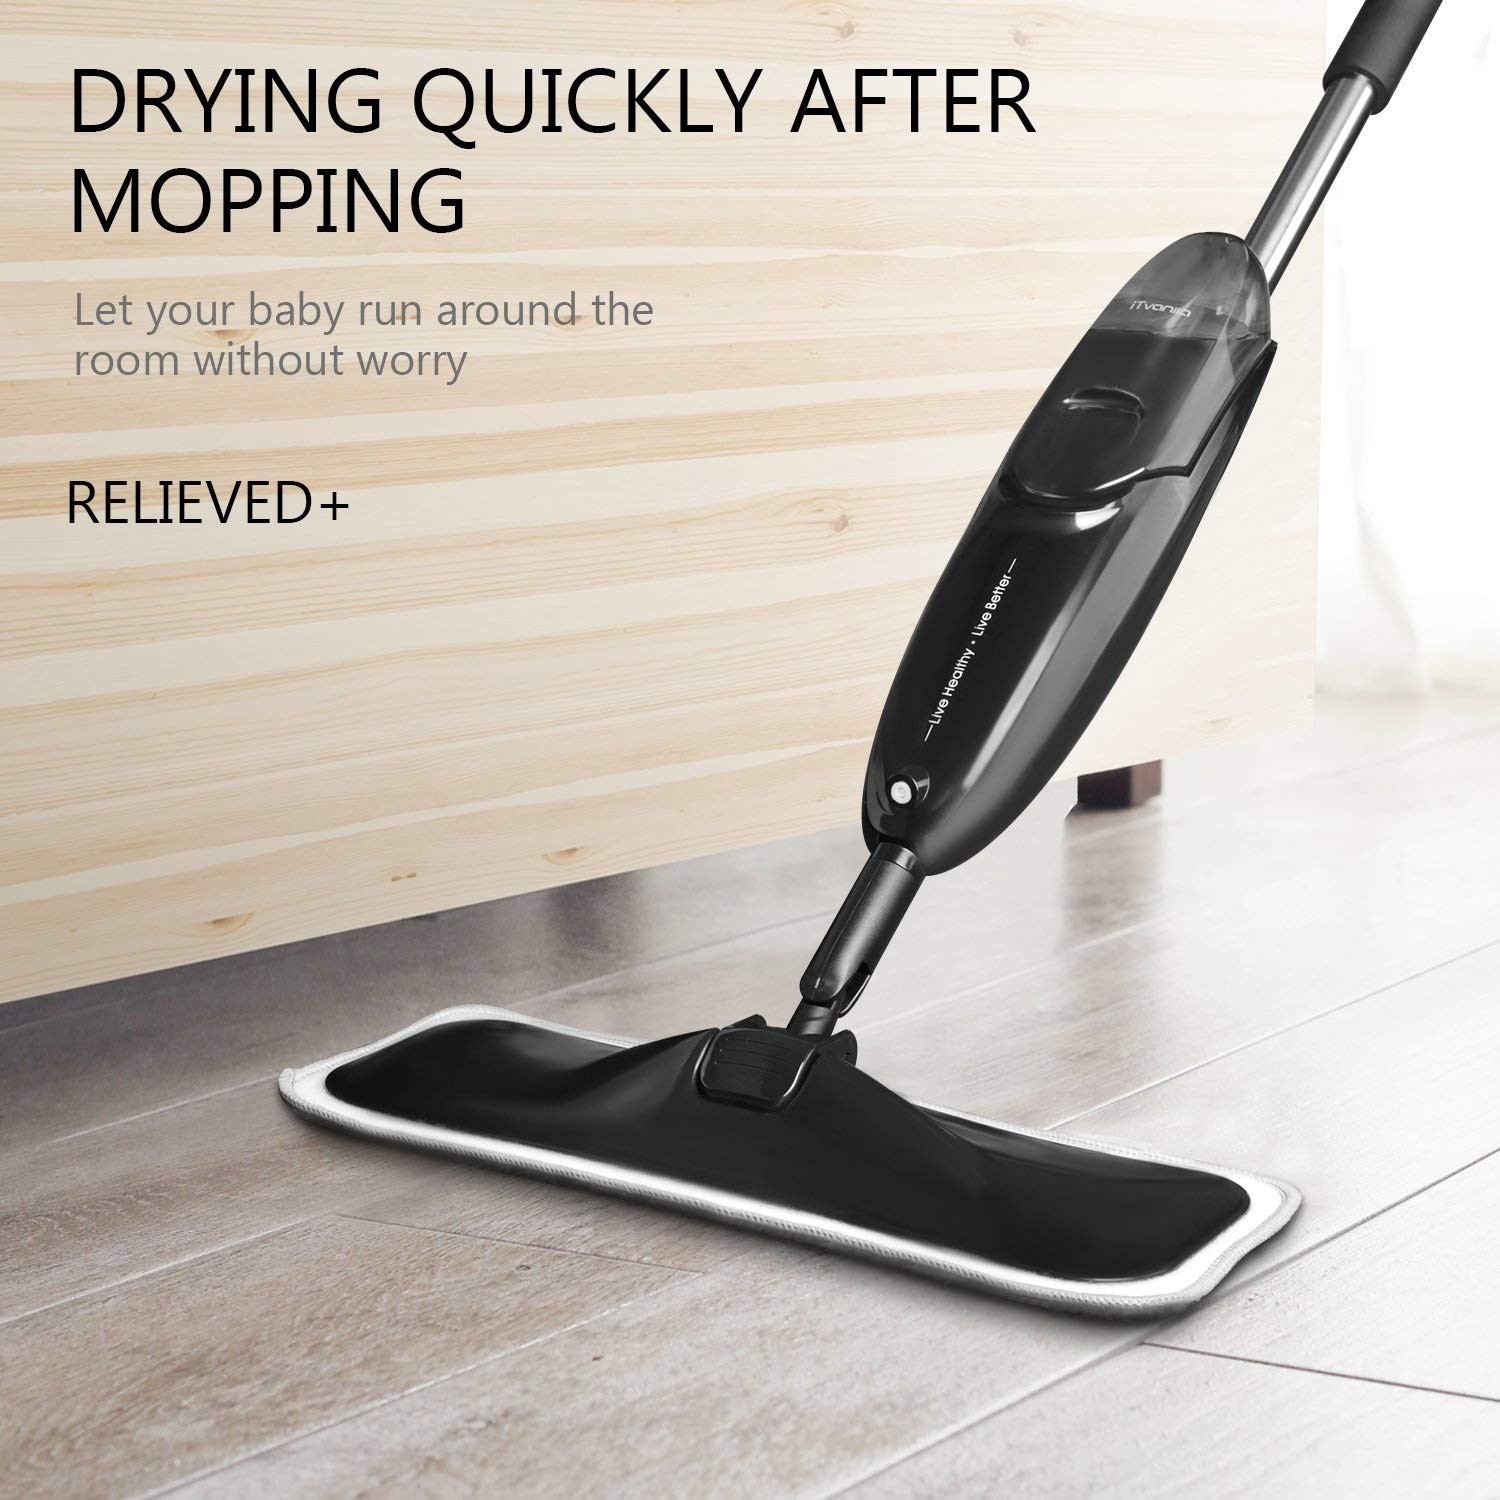 hardwood floor mop reviews of amazon com itvanila hardwood floor mop spray microfiber mop with 4 with regard to amazon com itvanila hardwood floor mop spray microfiber mop with 4 pcs reusable microfibre pads 360 degree rotating easy to clean dry wet mop for